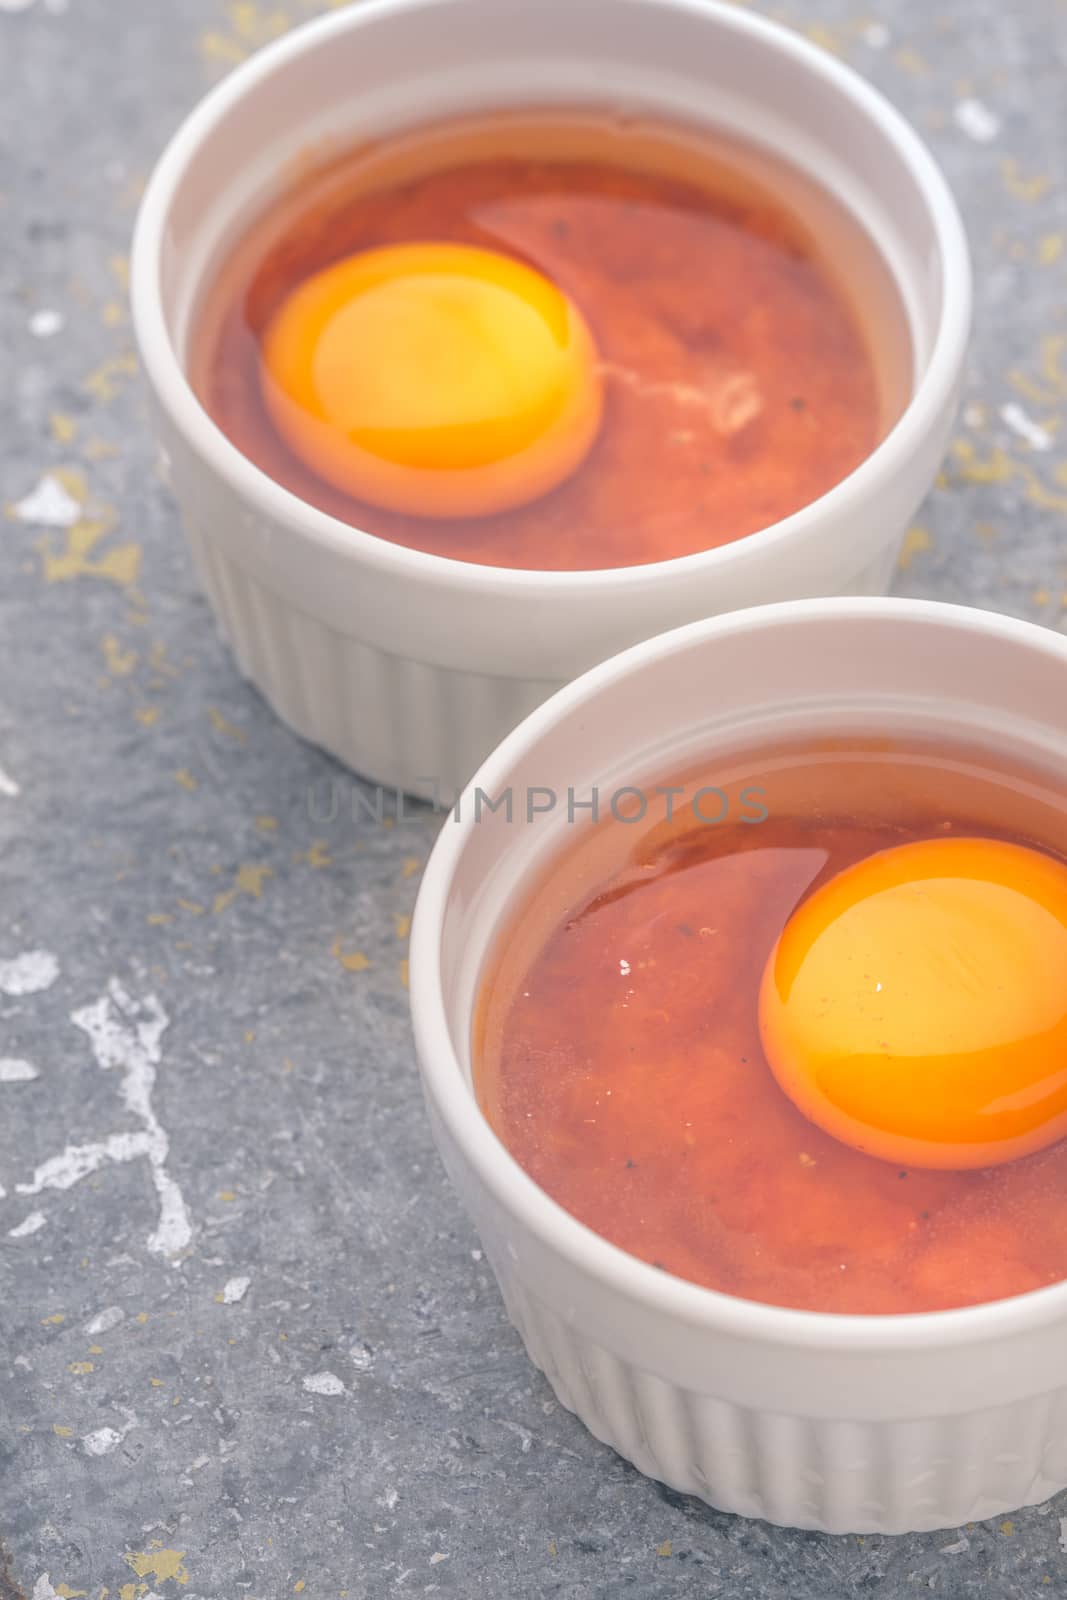 Raw eggs with tomatoes in the ramekins on the stone table vertical